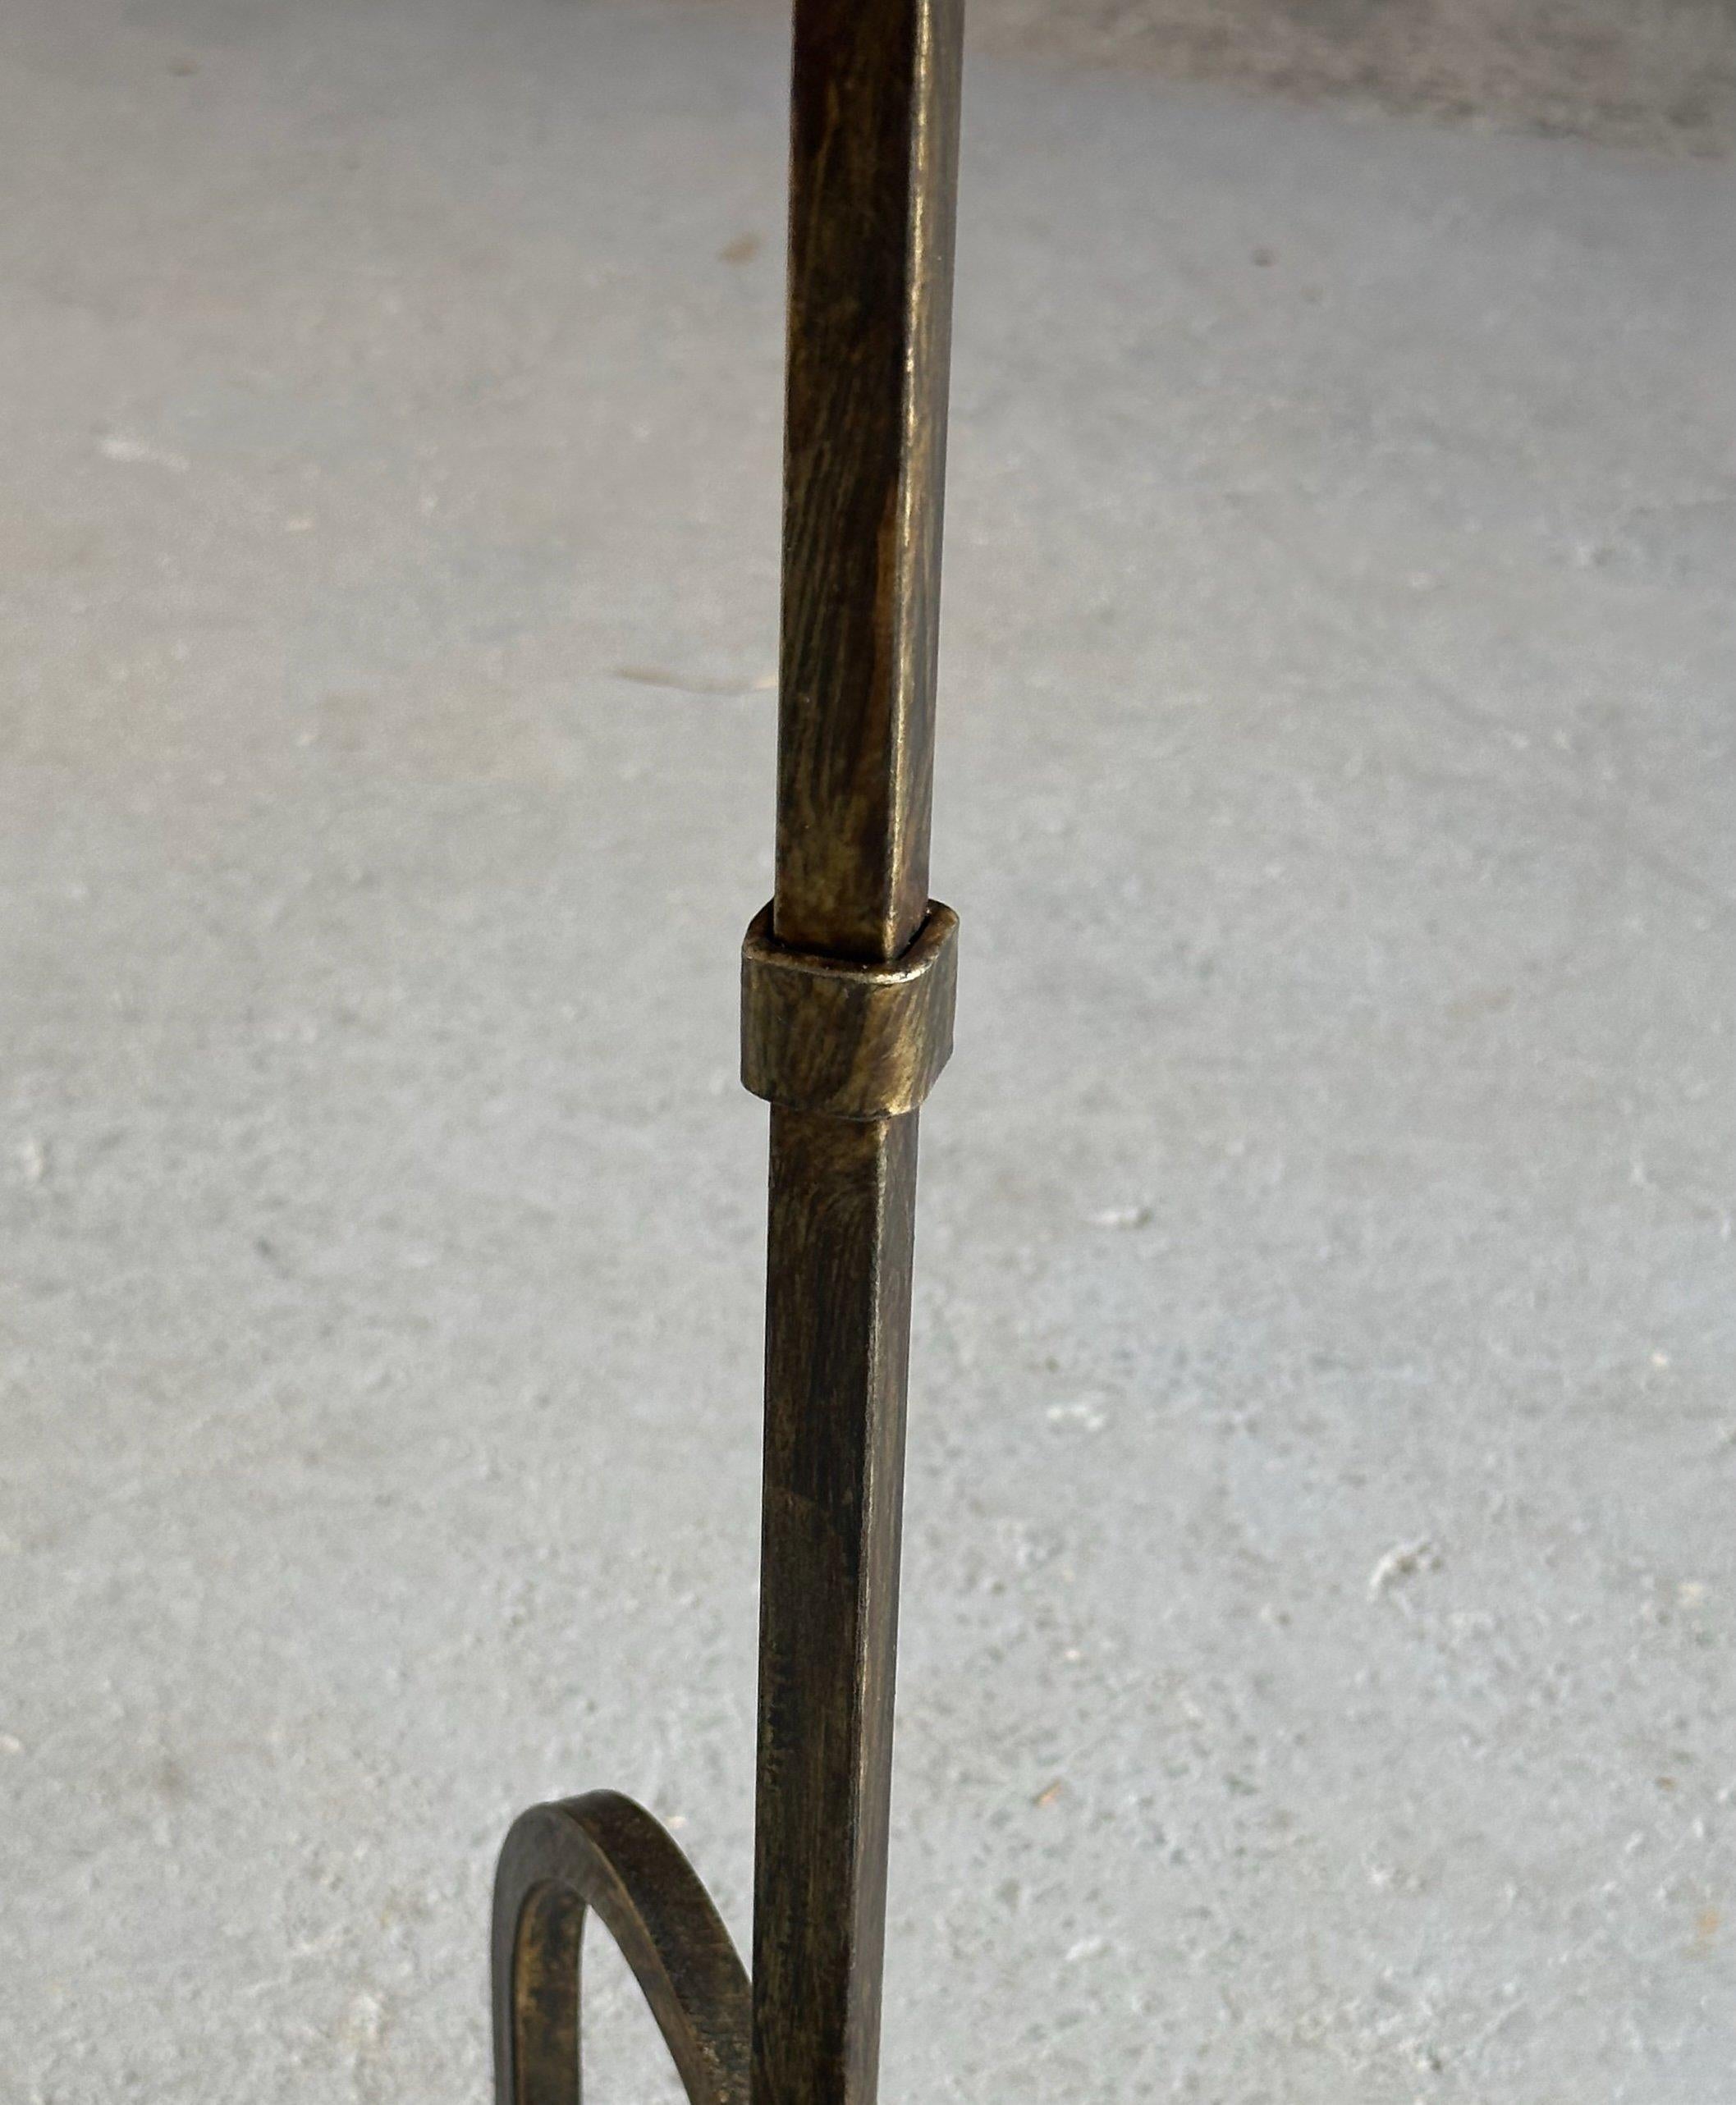 Small Spanish Iron Drinks Table on a Tripod Base For Sale 1